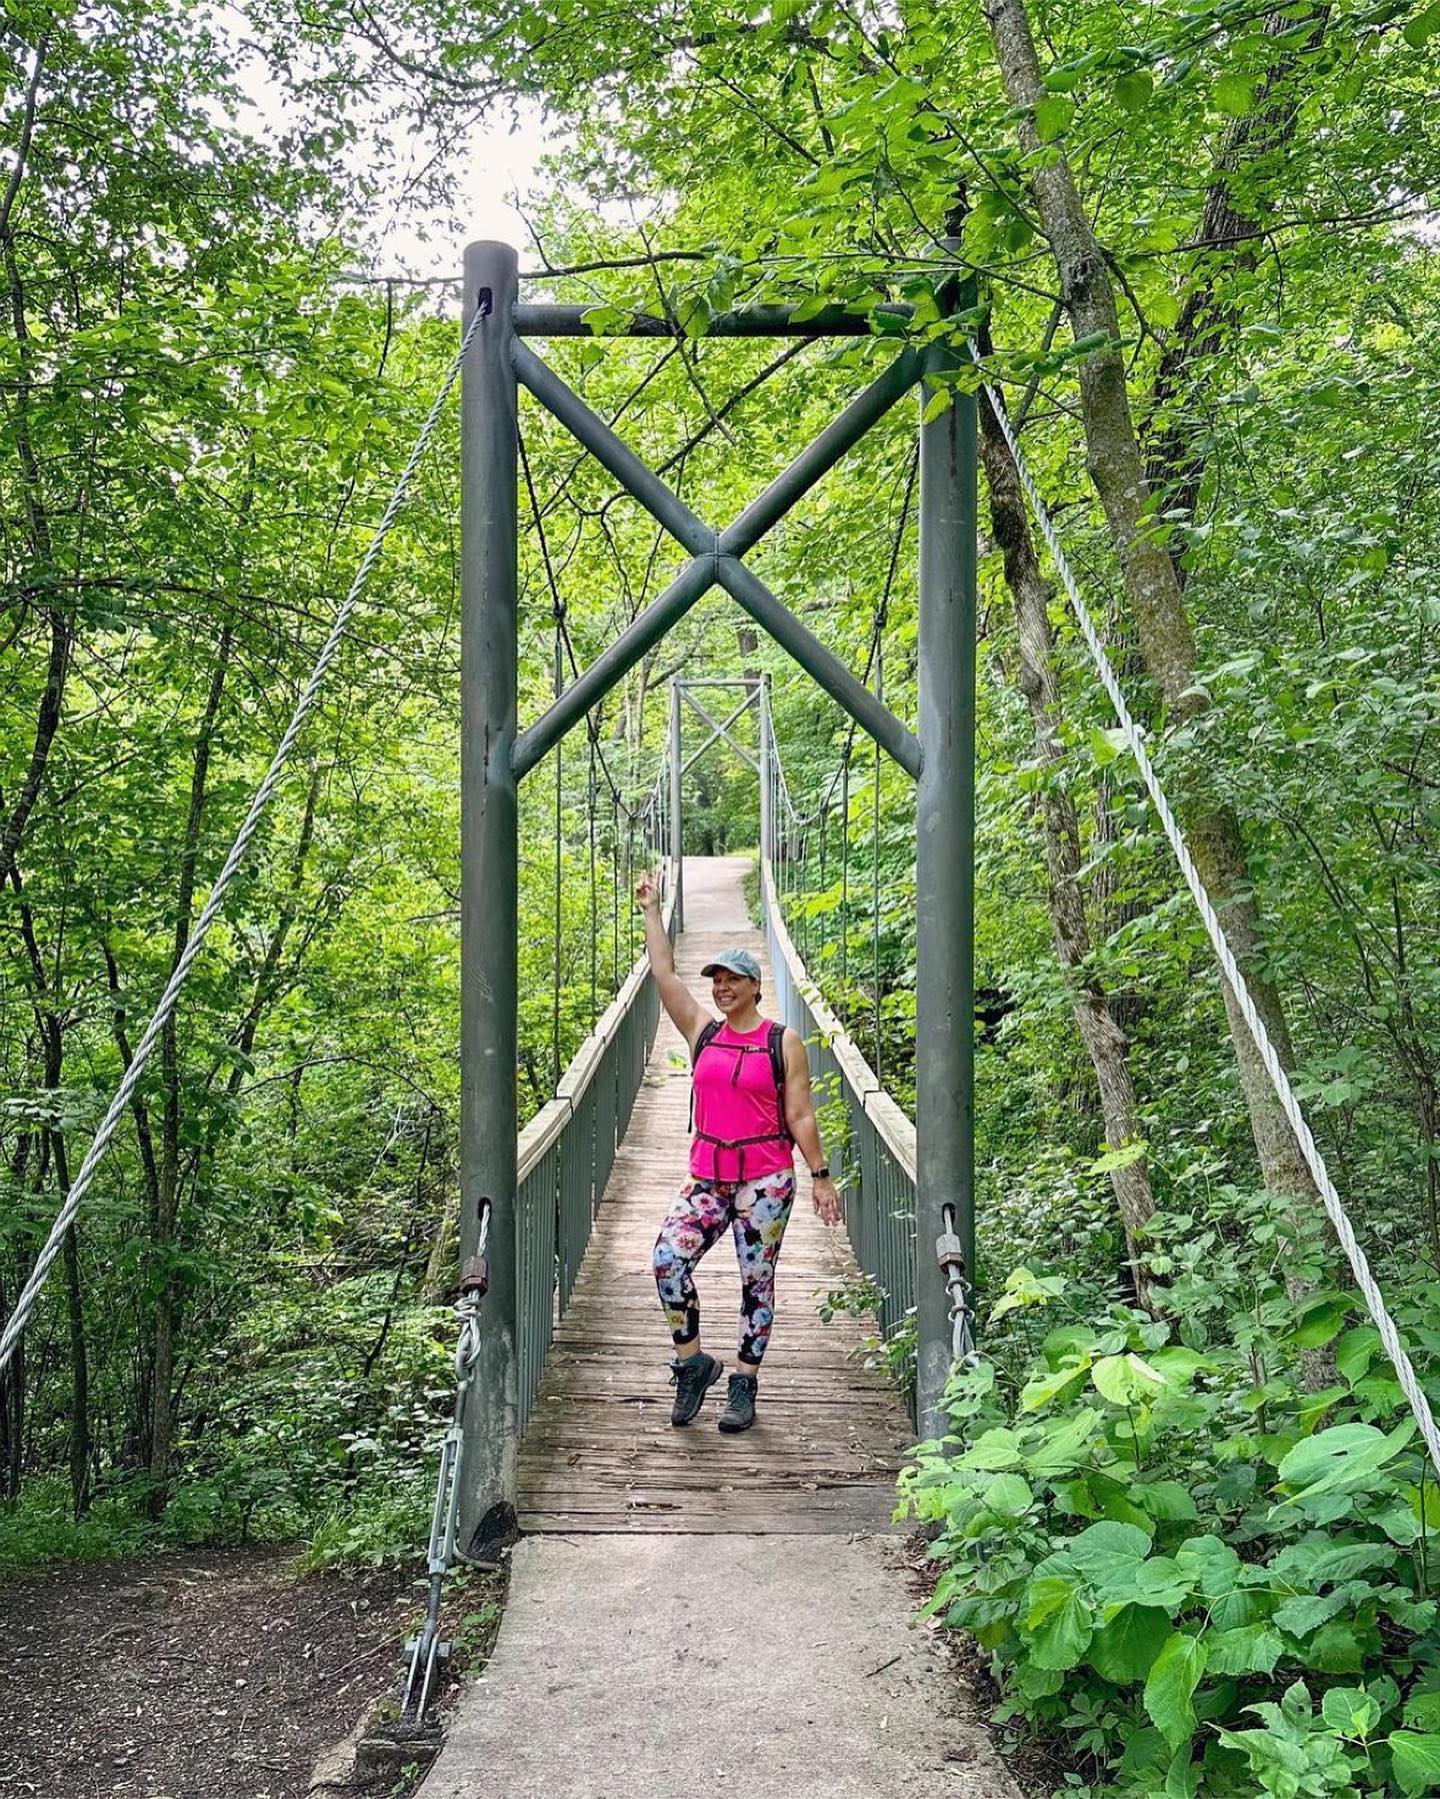 Thank you for highlighting everything Minnesota has to offer @shantastic.life•Imagining what it’ll look like at 5pm when I run away from all my work duties and stressors, LOL.️HAPPY WEEKEND!  What do you have planned? (Sleeping in and lounging count as plans!).....#womenwhoexplore #hikemn #womenwhohike #thingstodoinmn #adventureanywhere #midwestadventures #exploremn #midwestisbest #mnupstream #seekmoments #everyoneshike #adventureawaits #neature #hikemoreworryless #outdooradventures #justaddnature #midwesthiking #rrawimpact #52hikechallenge #minnstagramers #twincities #midwestgrammers #hikerbabes #lookoutweekend #happyweekend #itsfriday #swingbridge #redwoodfallsmn #midsize #midsizegals — from Instagram